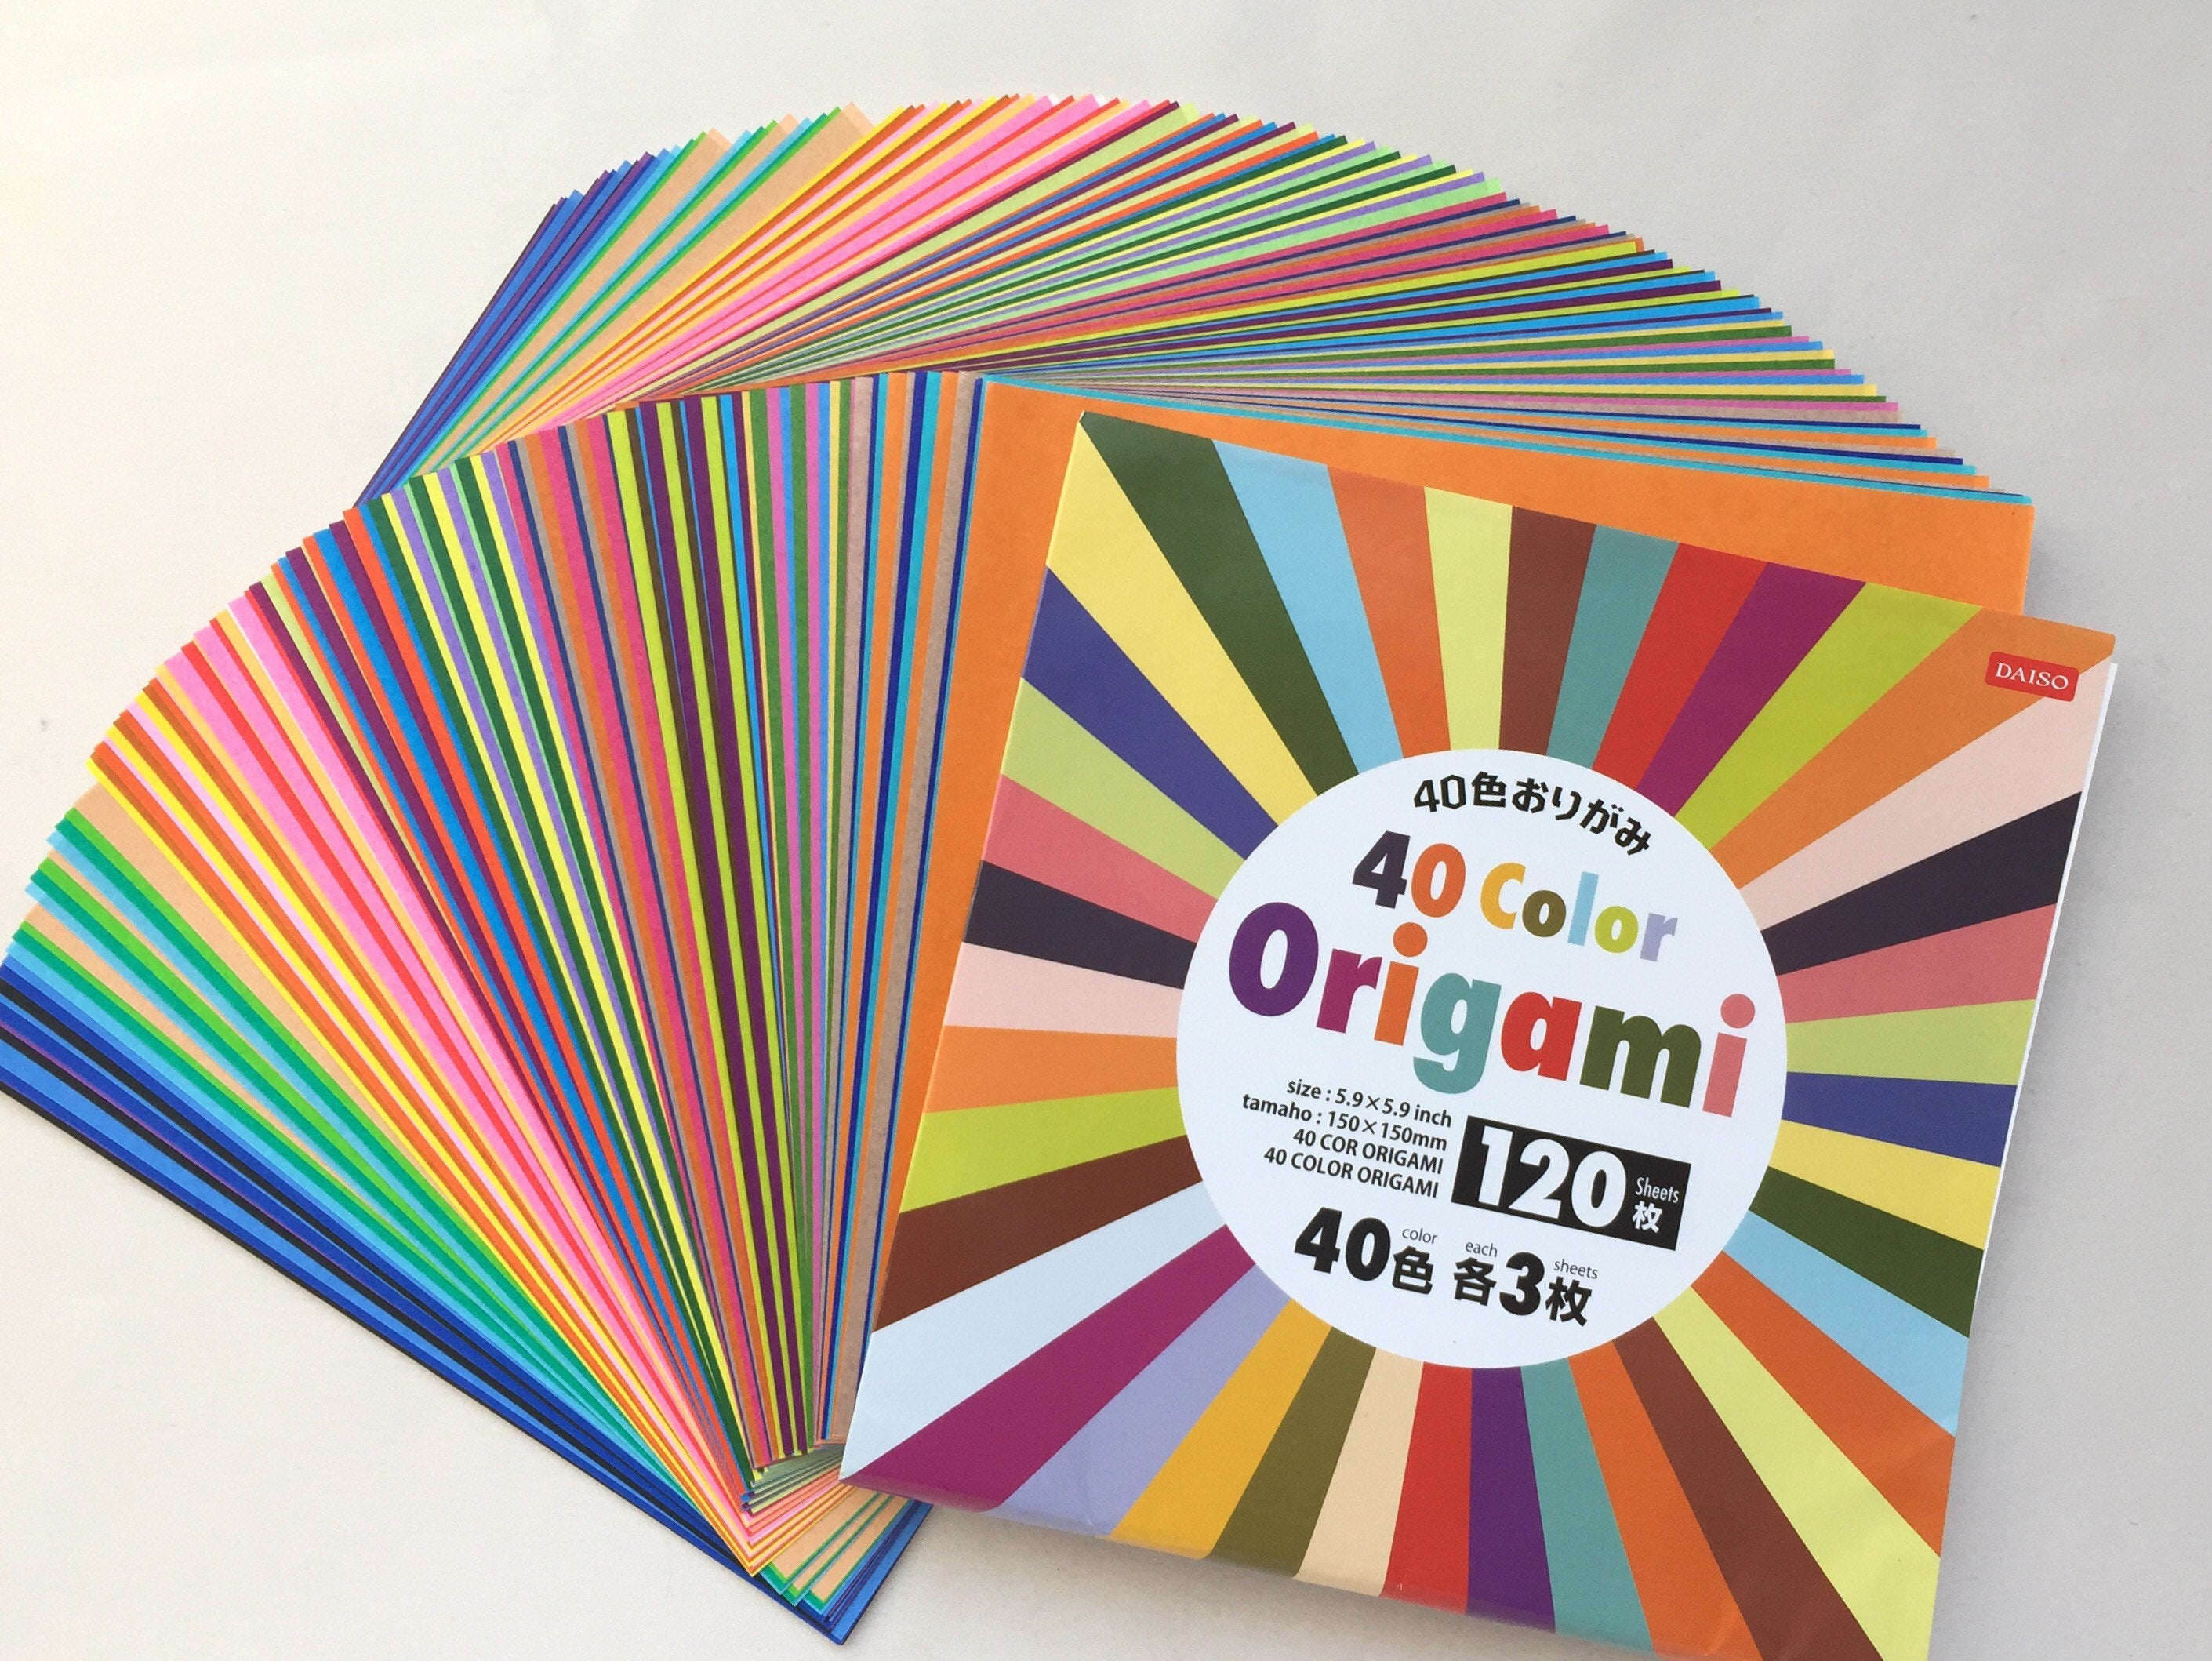 Solid Colored Origami Paper 120 Sheets Of Origami Paper 40 Colors Solid Colors 6 Square